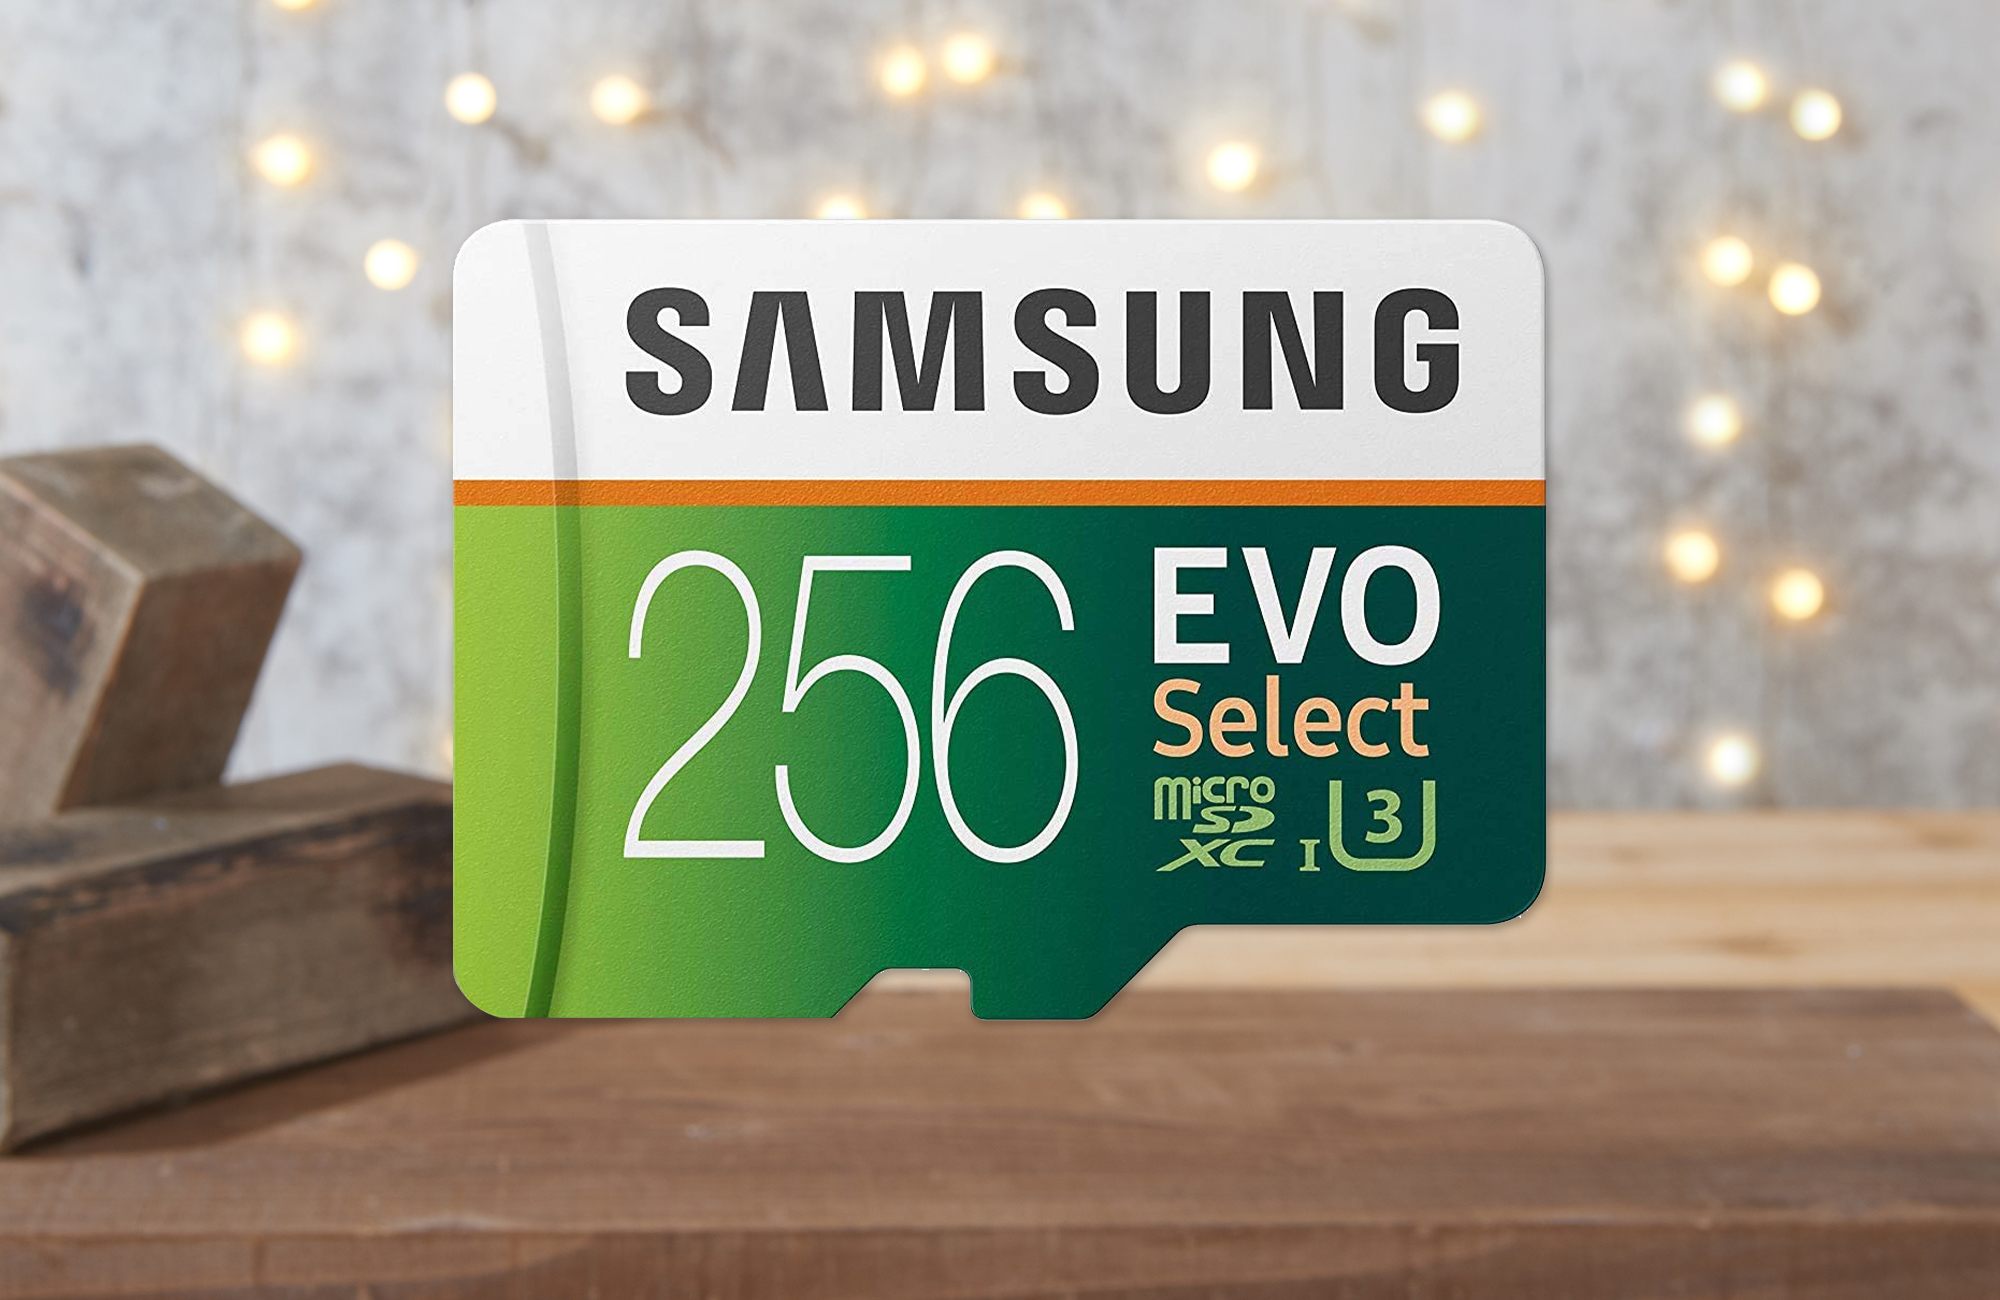 Samsung EVO Select microSDXC card (256GB) for the Engadget 2021 Holiday Gift Guide.
